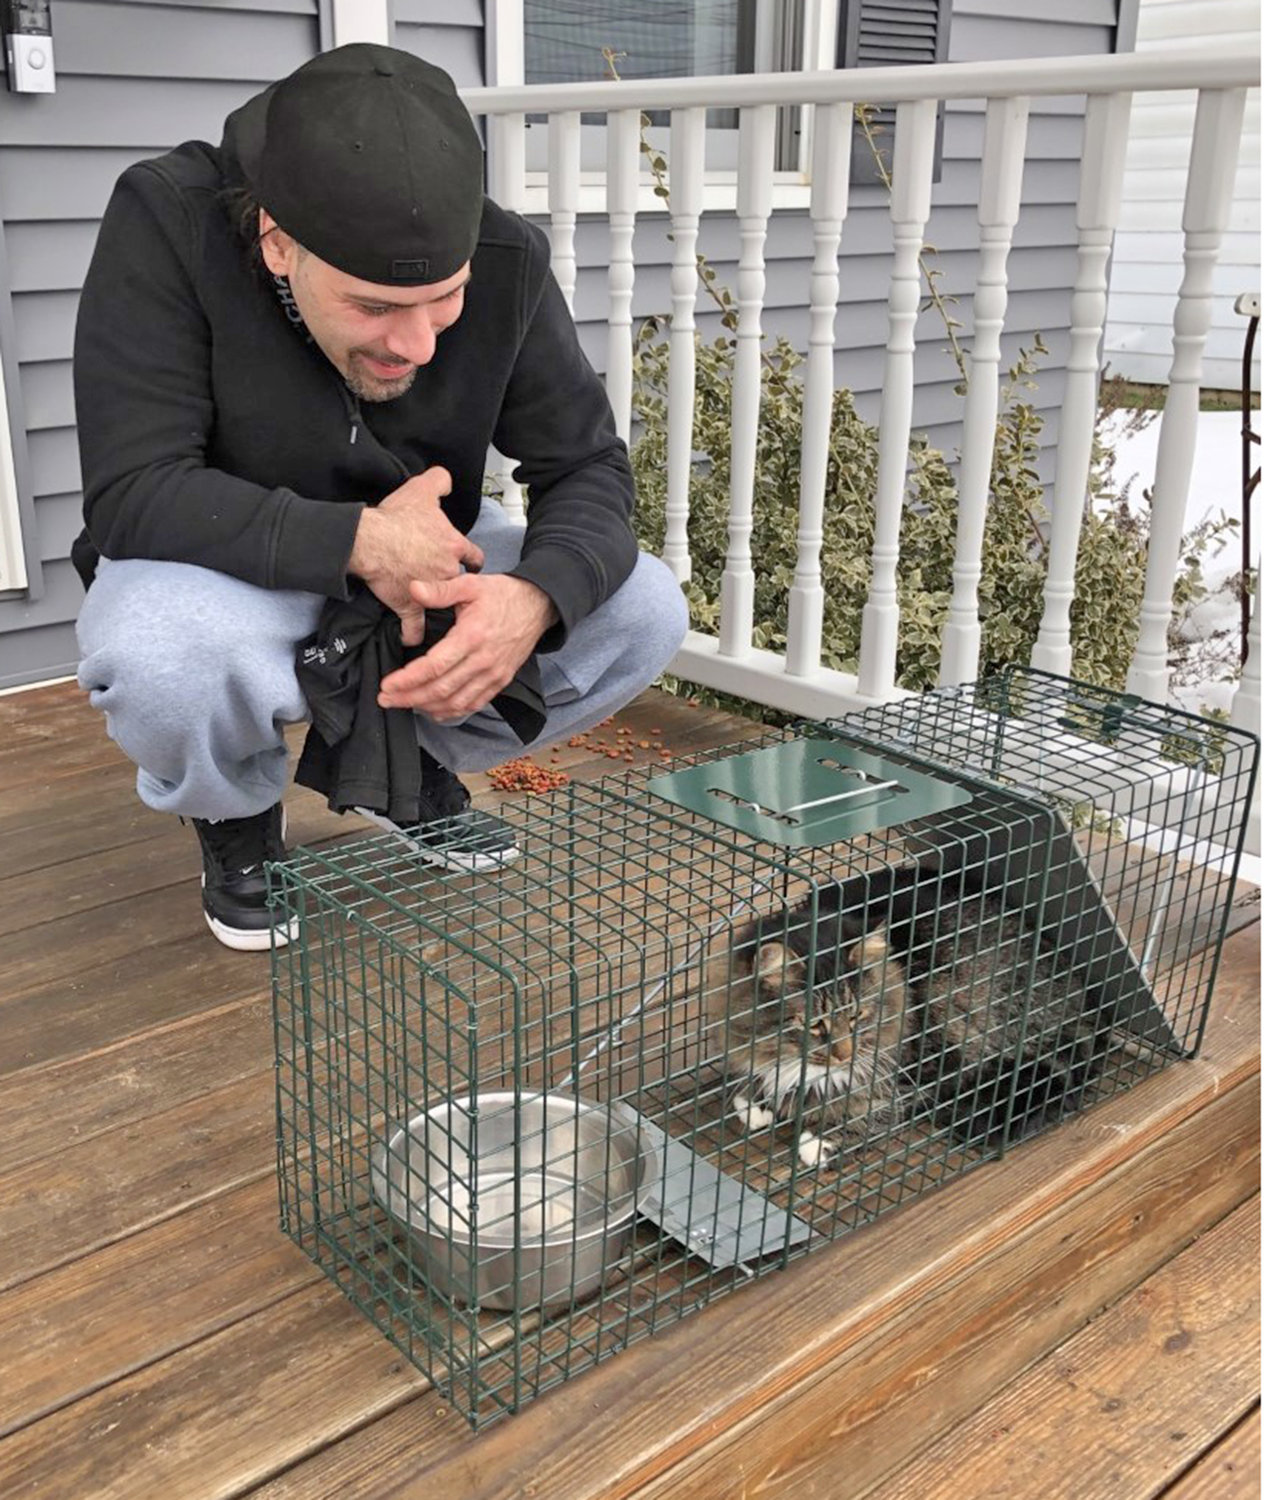 BUDDIES REUNITED — Benji Pedroza, of Court Street, says, "Hello," to feline friend Buddy shortly after being rescued on Feb. 28.  Buddy somehow escaped from Pedroza's house and had been missing for at least two months.